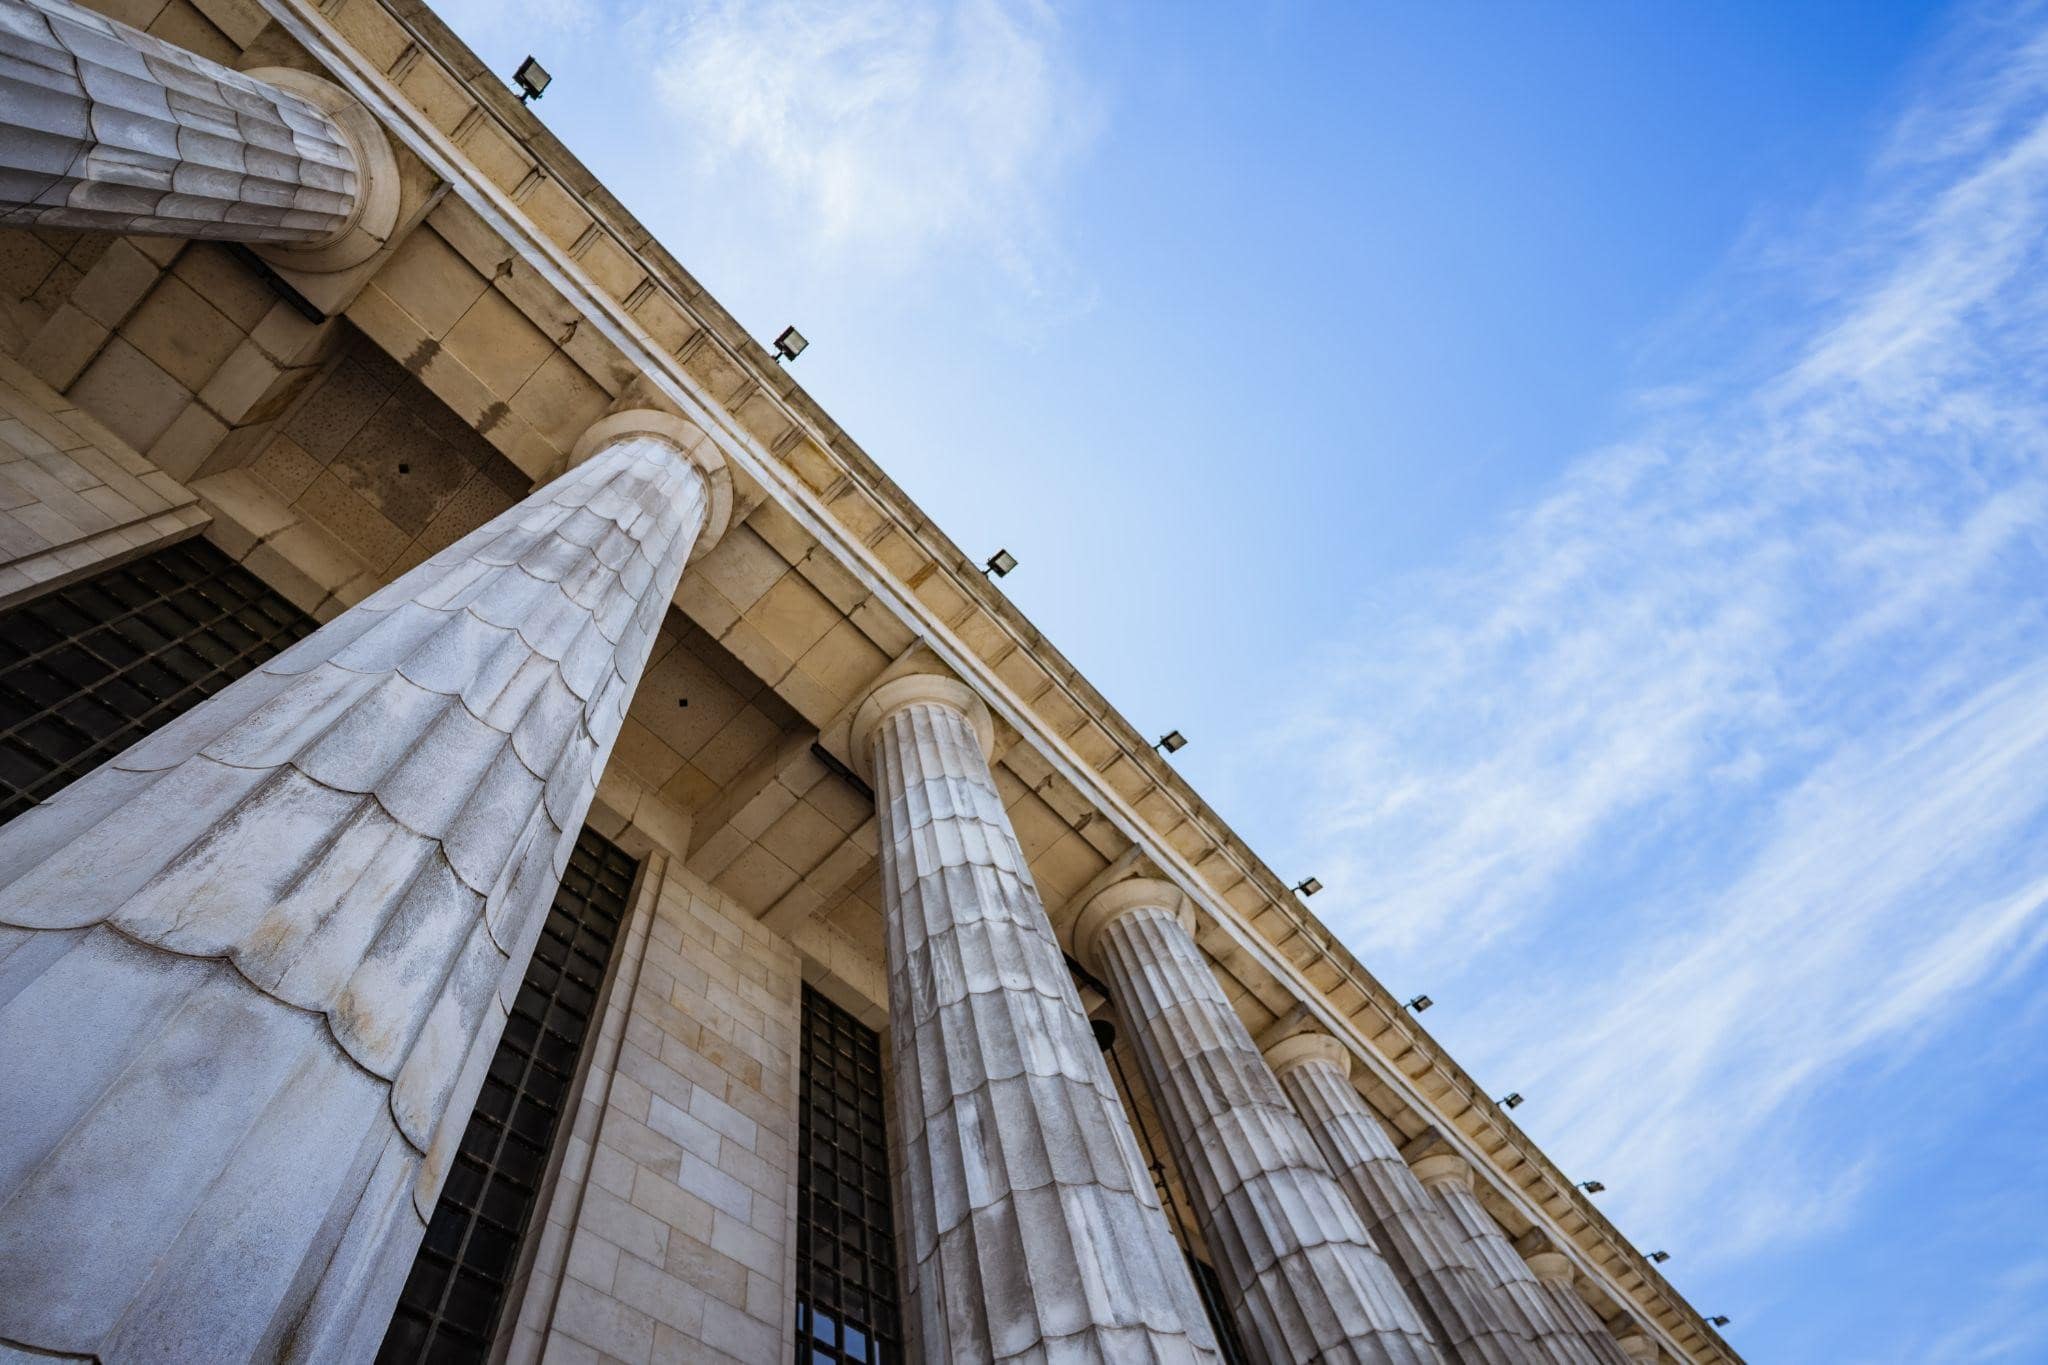 image of court house with pillars at an upward angel